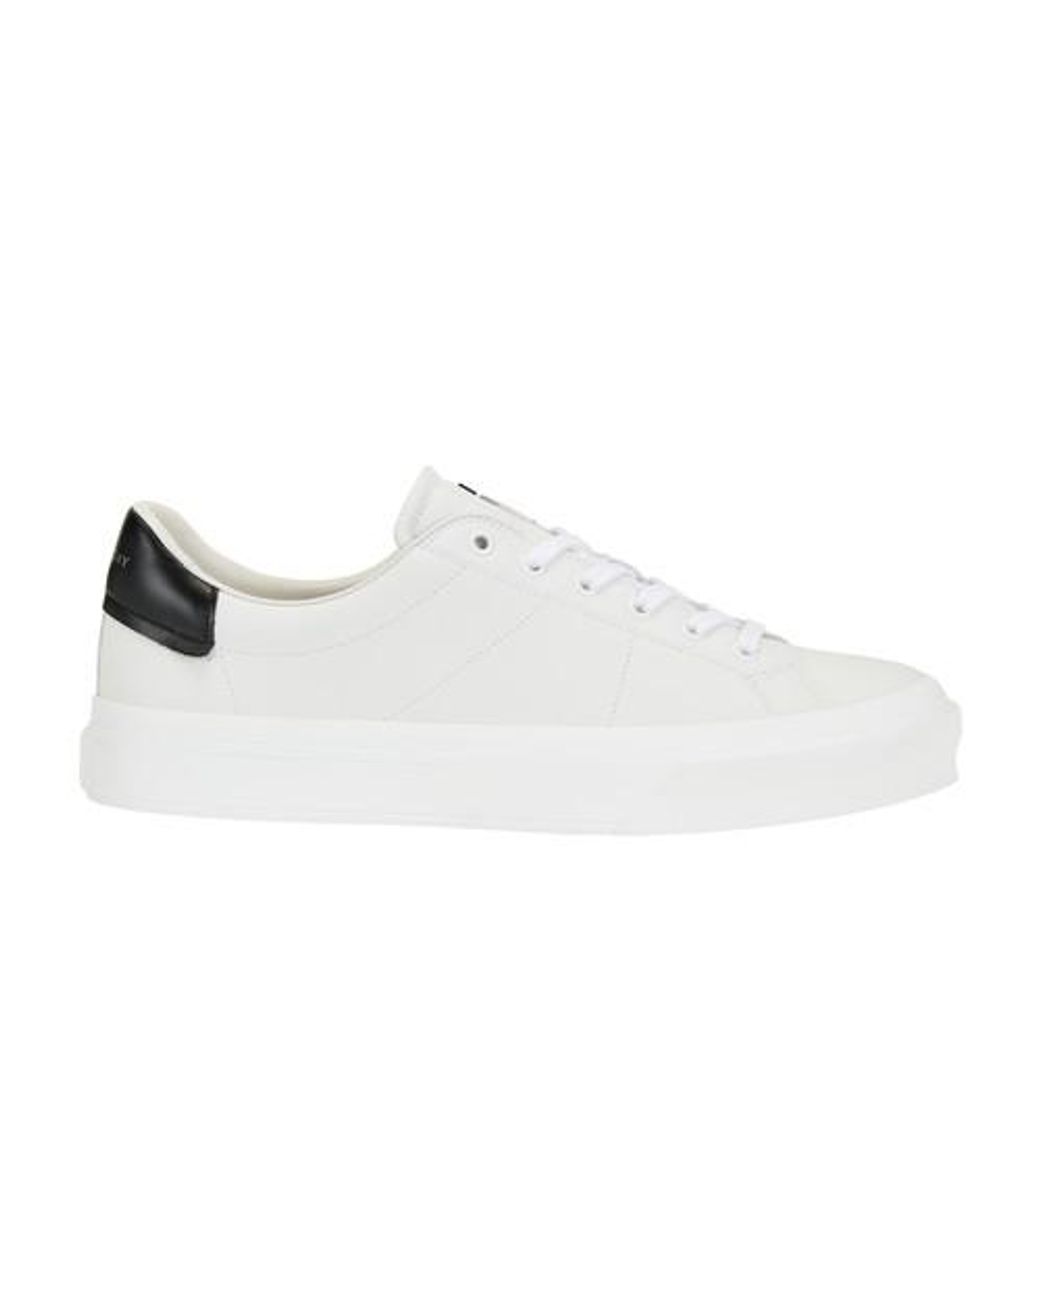 Givenchy Silk City Sport Sneakers in White for Men - Lyst